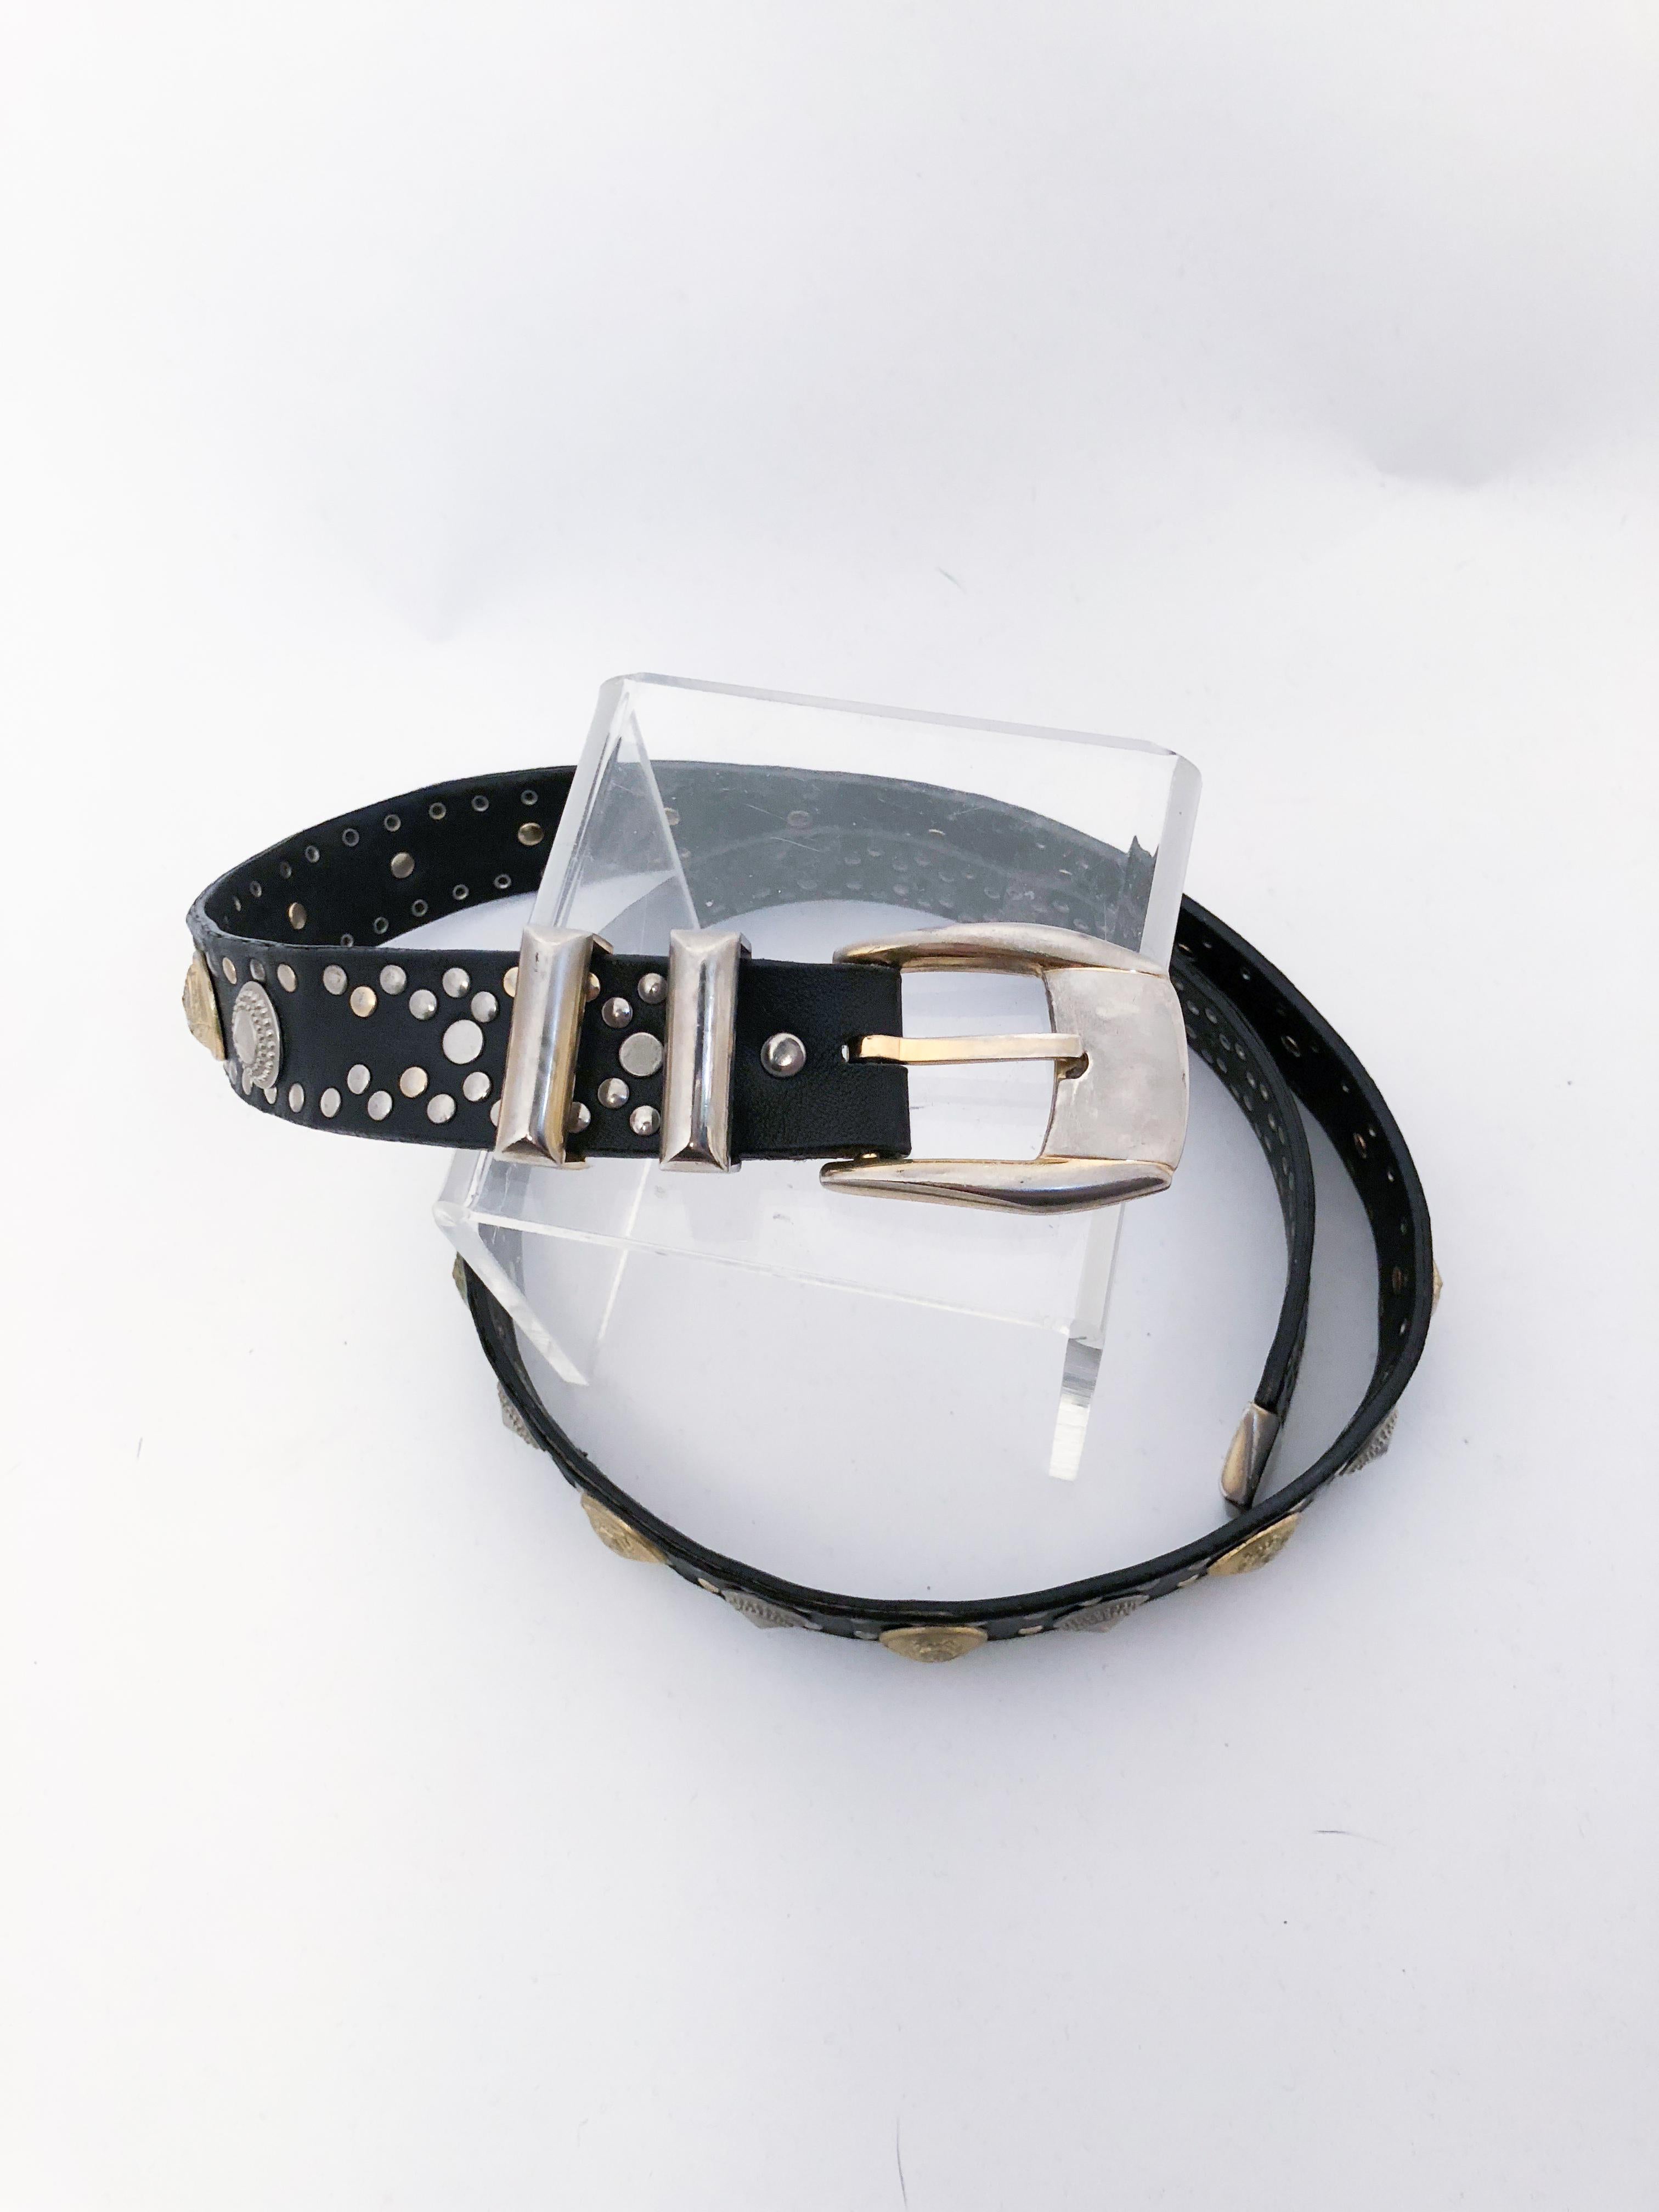 1990s Versace Leather Belt With Gold Medusa Head Studs. Black leather belt with silver and gold-tone studs. Also features large silver studs and gold-tone medusa head studs.